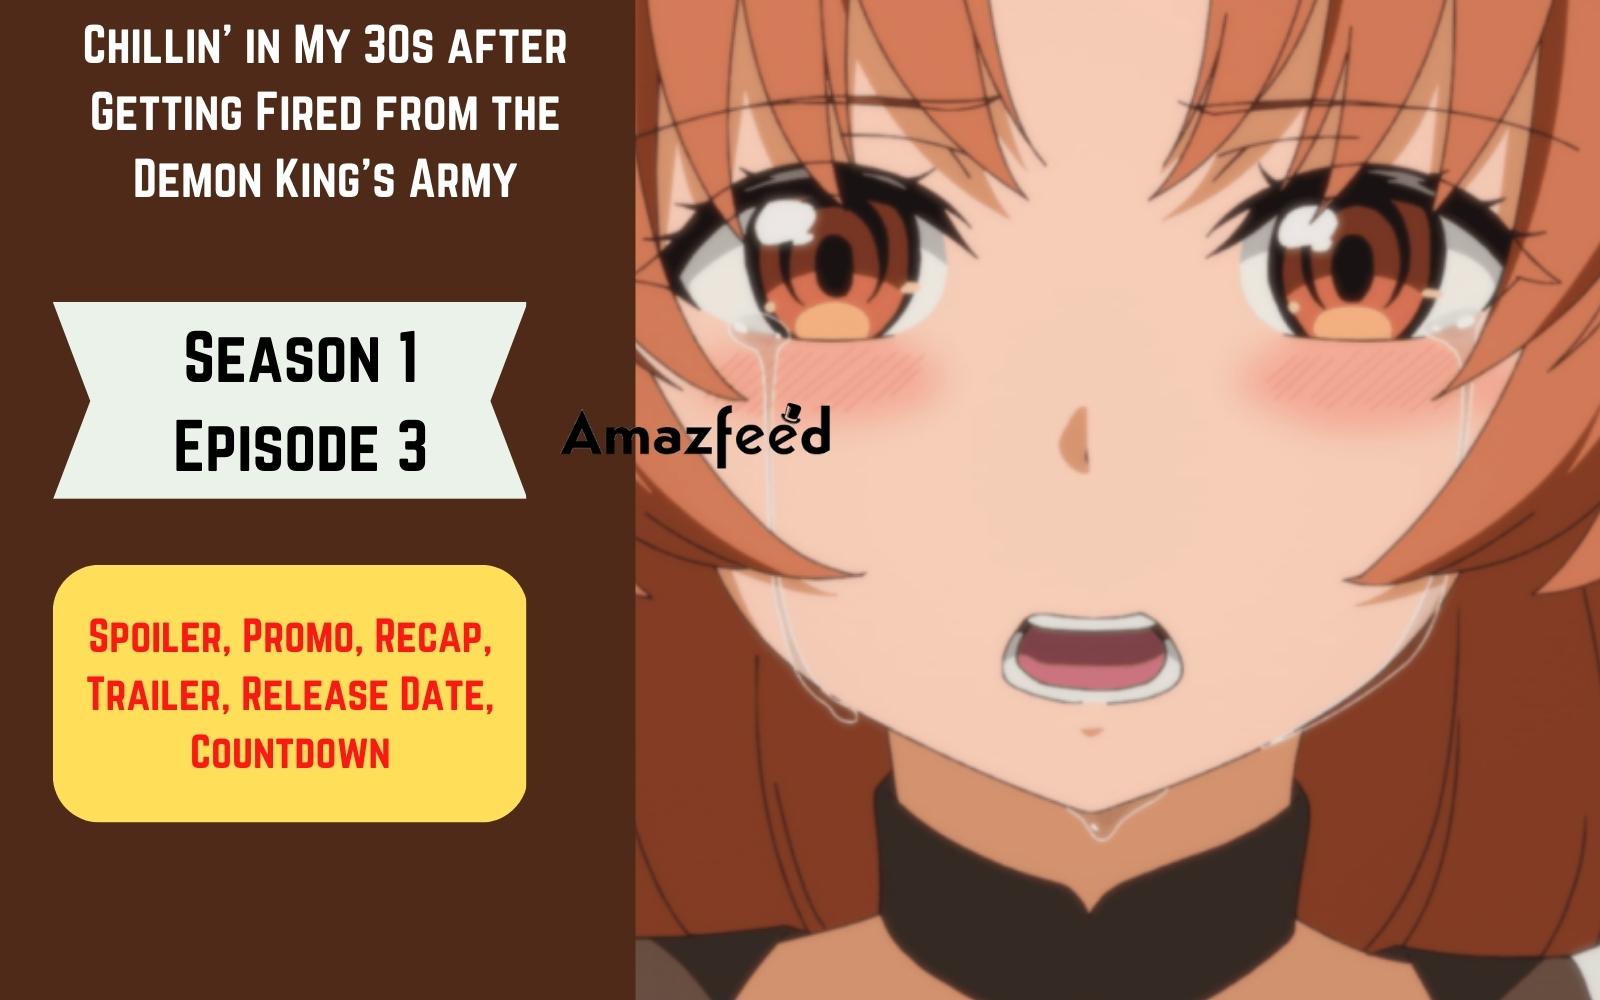 Watch Chillin' in My 30s after Getting Fired from the Demon King's Army  season 1 episode 5 streaming online